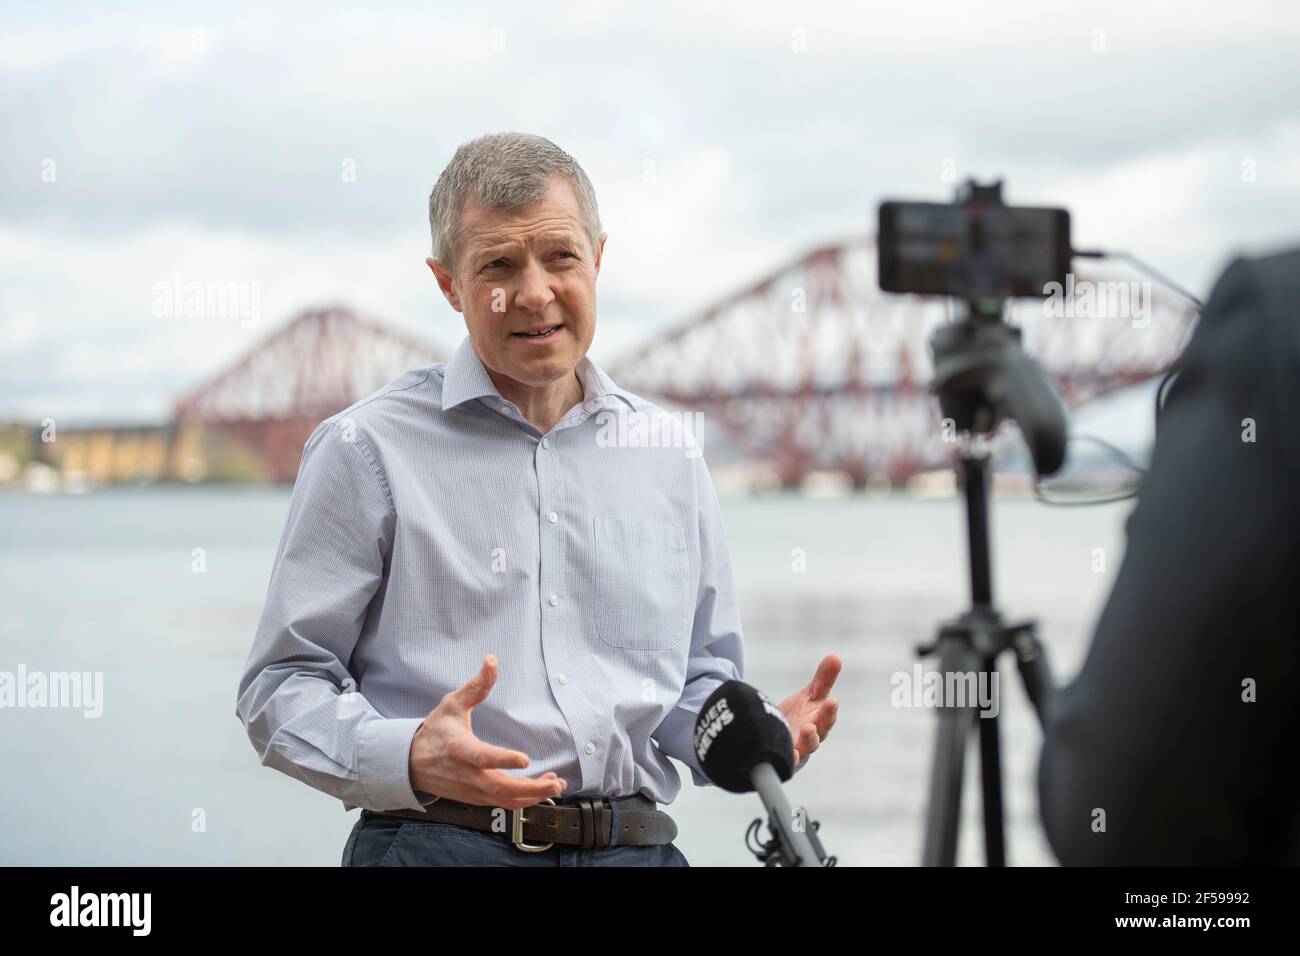 South Queensferry, Scotland, UK. 25th Mar, 2021. PICTURED: Willie Rennie MSP. Willie Rennie MSP - Leader of the Scottish Liberal Democrat Party (Scottish Lib Dems) joined by Edinburgh Northern and Leith candidate, Rebecca Bell and her daughter Daphne. He reads Rebecca's daughter a book on a giant beach chair with the view of the Forth Bridge behind as part of their Holyrood Elections campaign trail for the 6th May. Credit: Colin Fisher/Alamy Live News Stock Photo